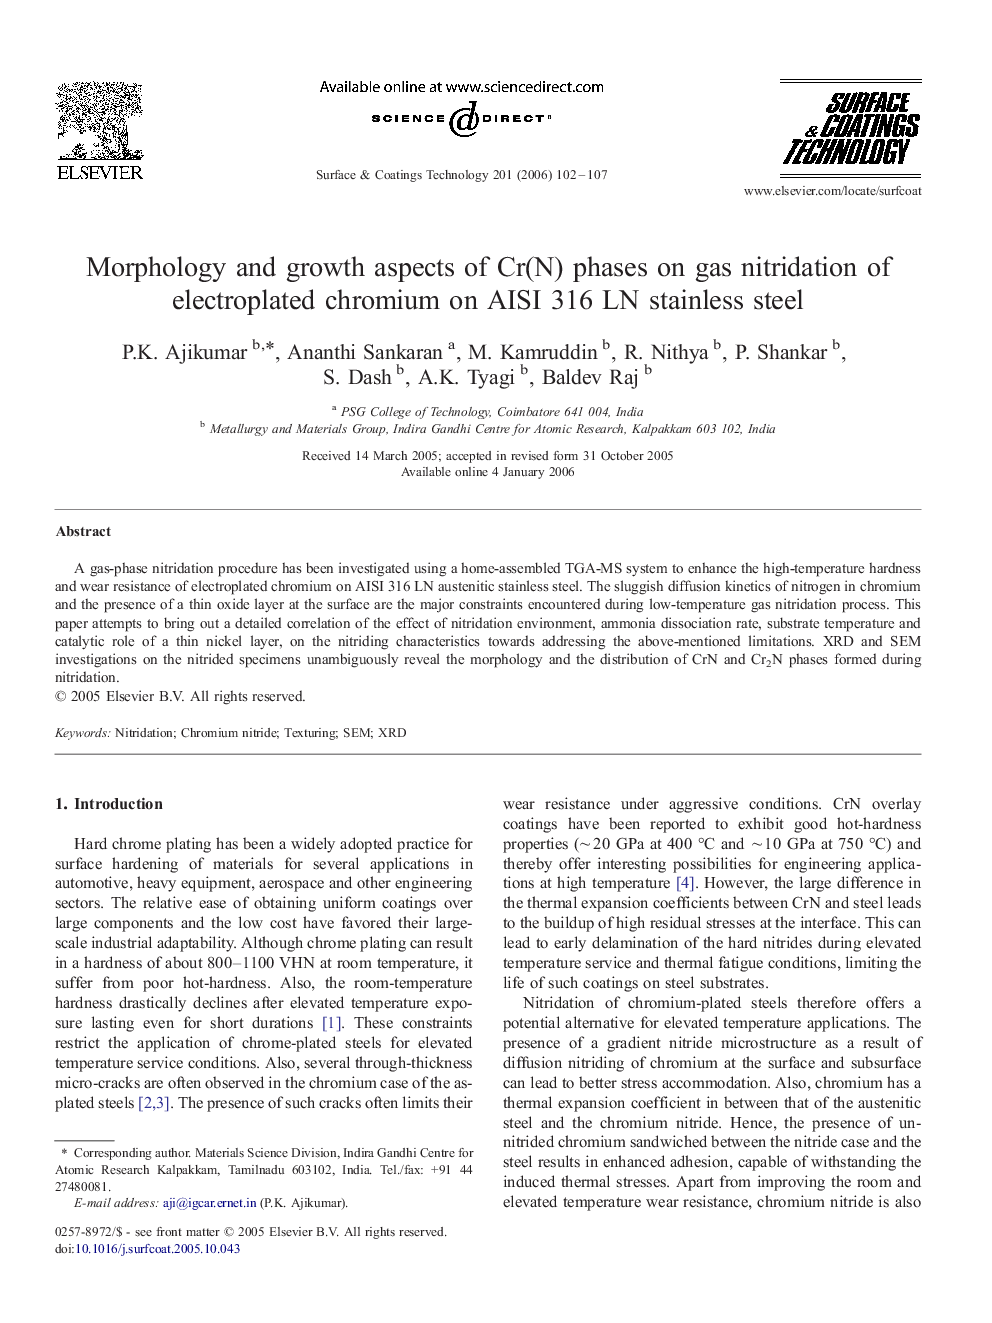 Morphology and growth aspects of Cr(N) phases on gas nitridation of electroplated chromium on AISI 316 LN stainless steel